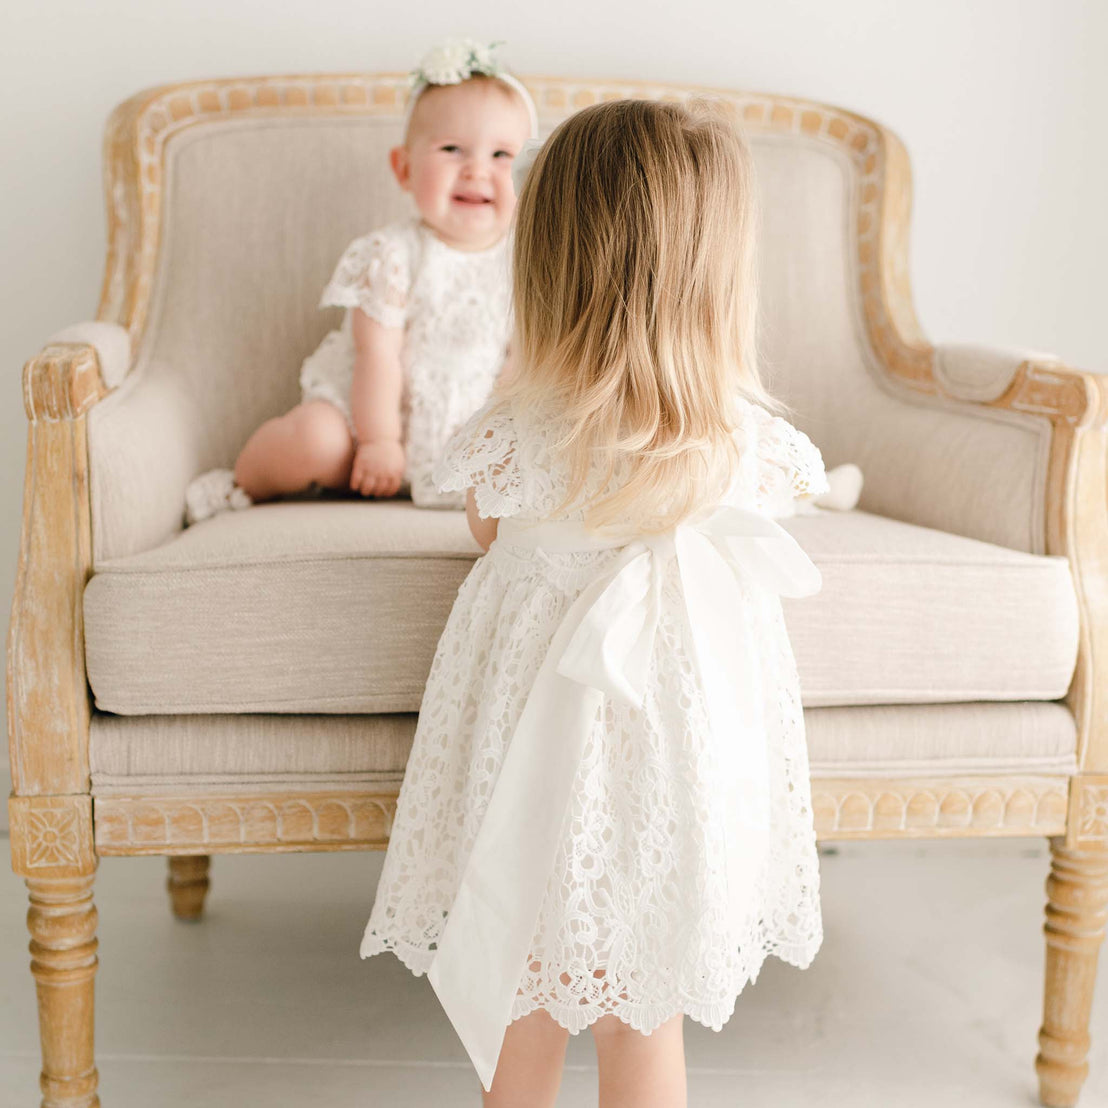 Two baby girls wearing the Lola Dress. Detail shows the back of the dress with ties in back and sash.